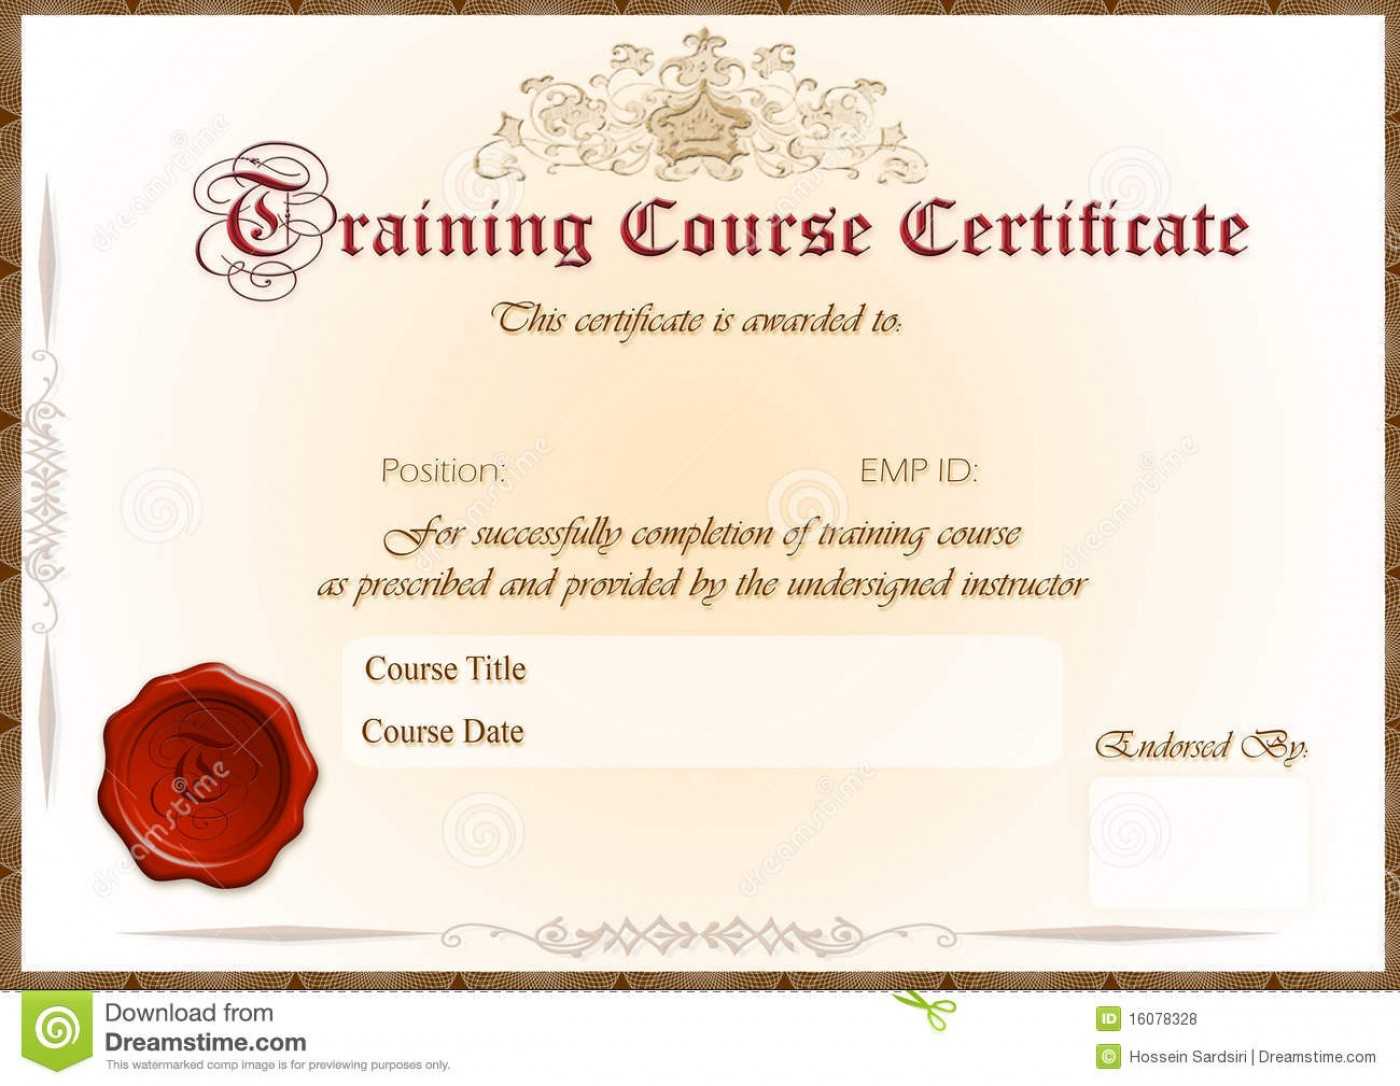 026 Template Ideas Certificates Free Gift Certificate Makes With This Entitles The Bearer To Template Certificate